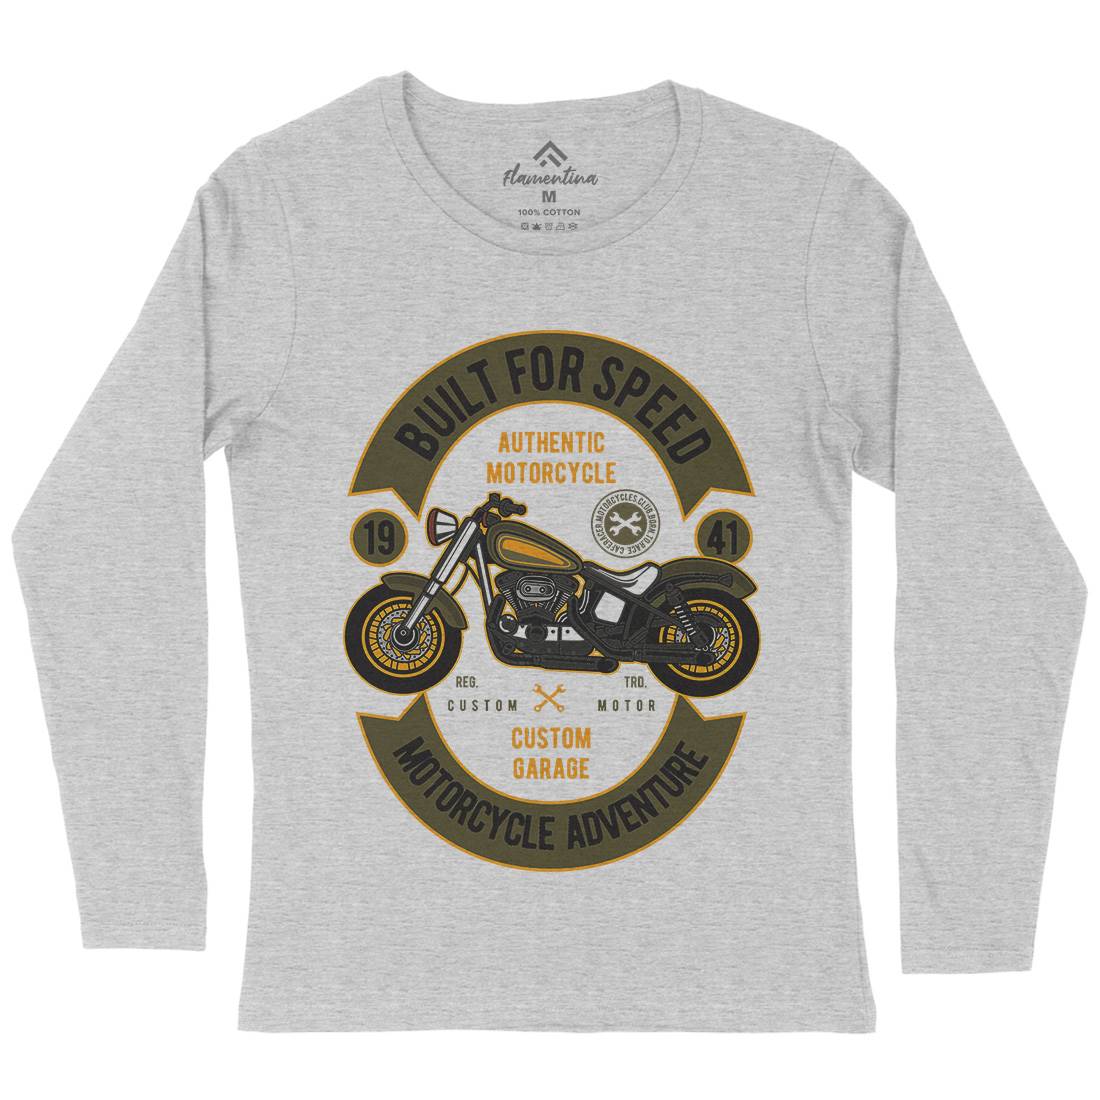 Built For Speed Womens Long Sleeve T-Shirt Motorcycles D512